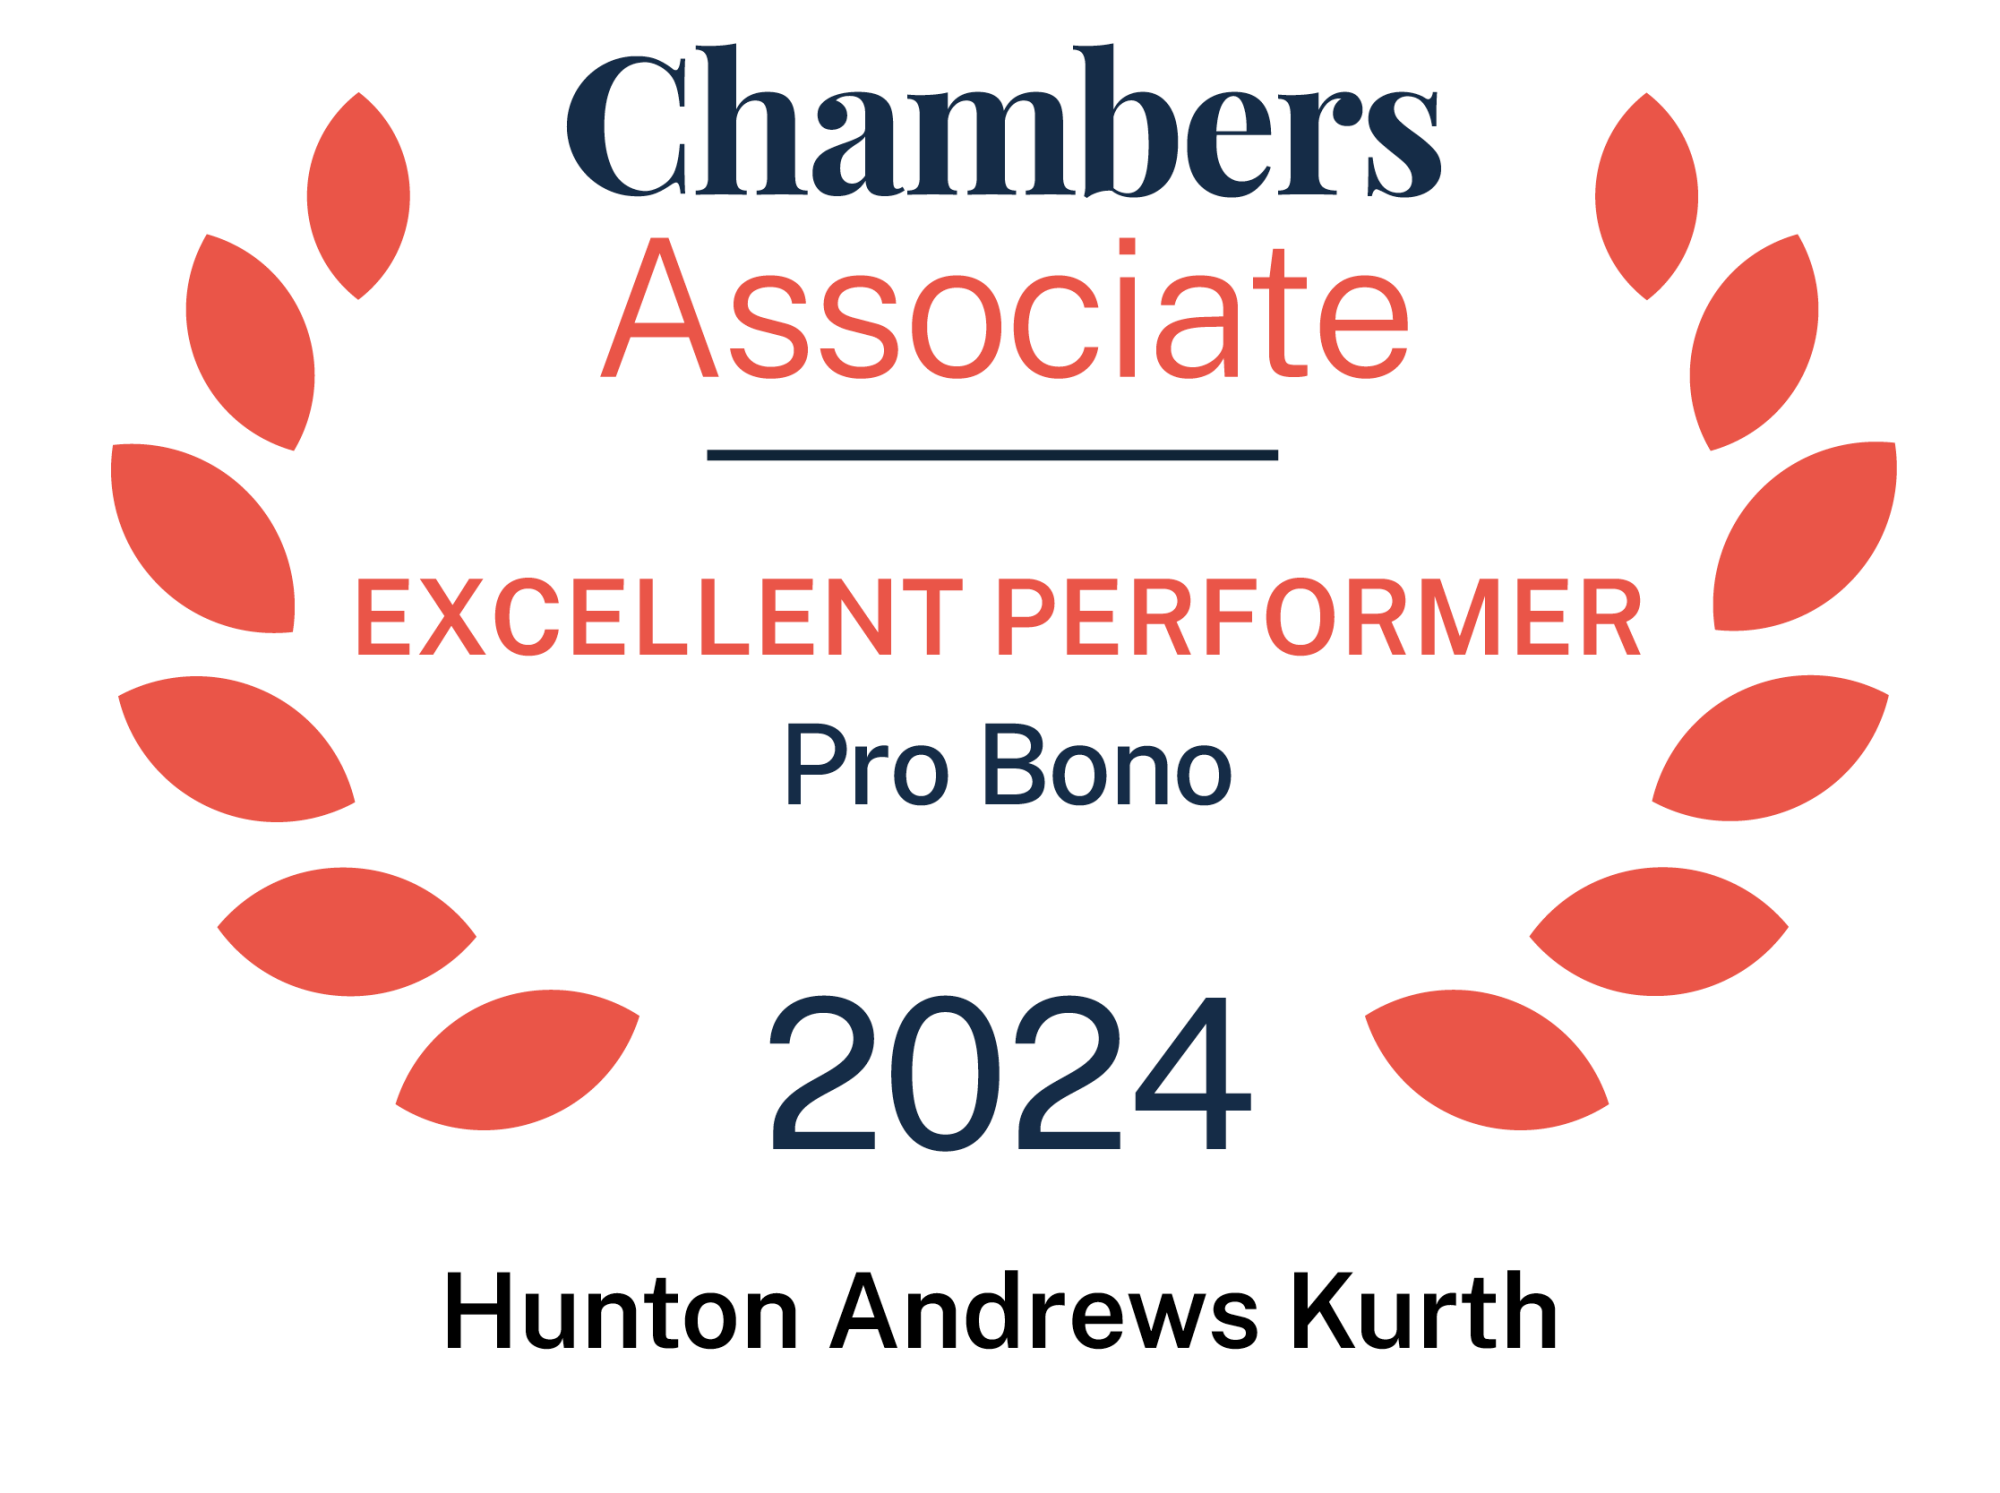 Chambers Associate Excellent Performer: Pro Bono 2024